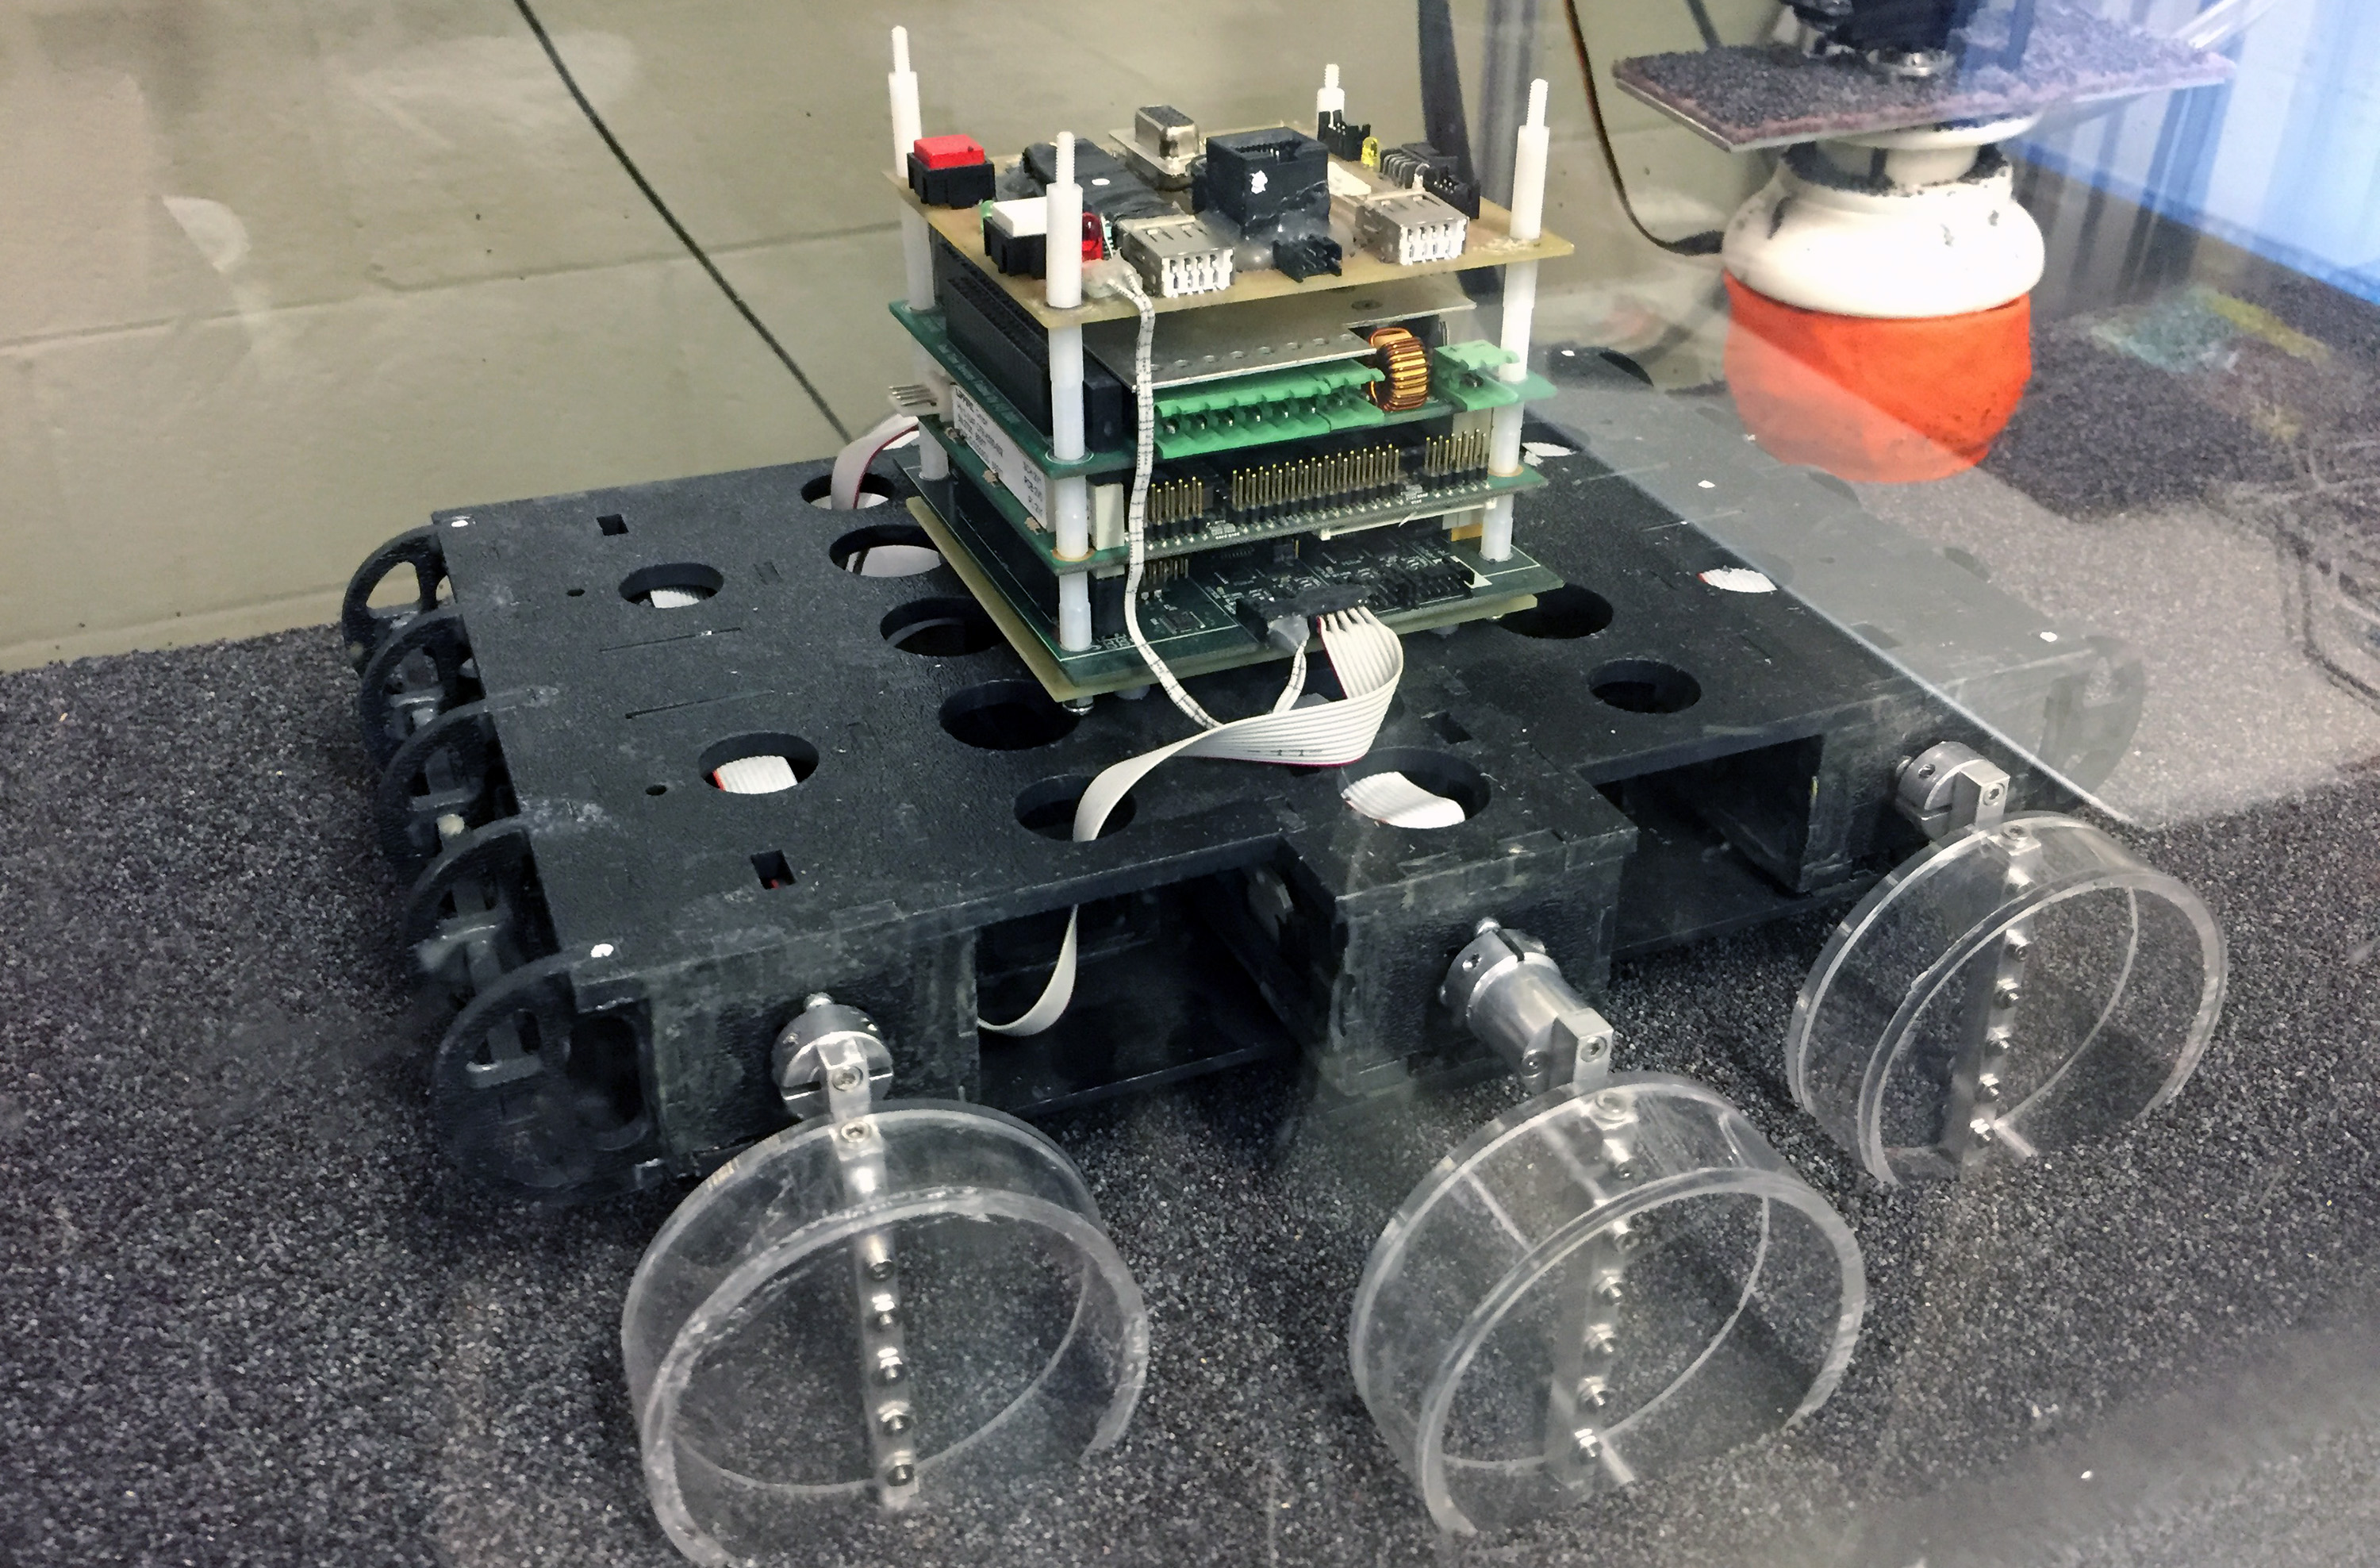 Sandbot, a bio-inspired hexapedal robot, is shown in a trackway filled with poppy seeds to simulate various granular surfaces. The robot was used to study how the stiffness of a loosely-packed surface affects the ability to move across it. (Credit: John Toon, Georgia Tech)